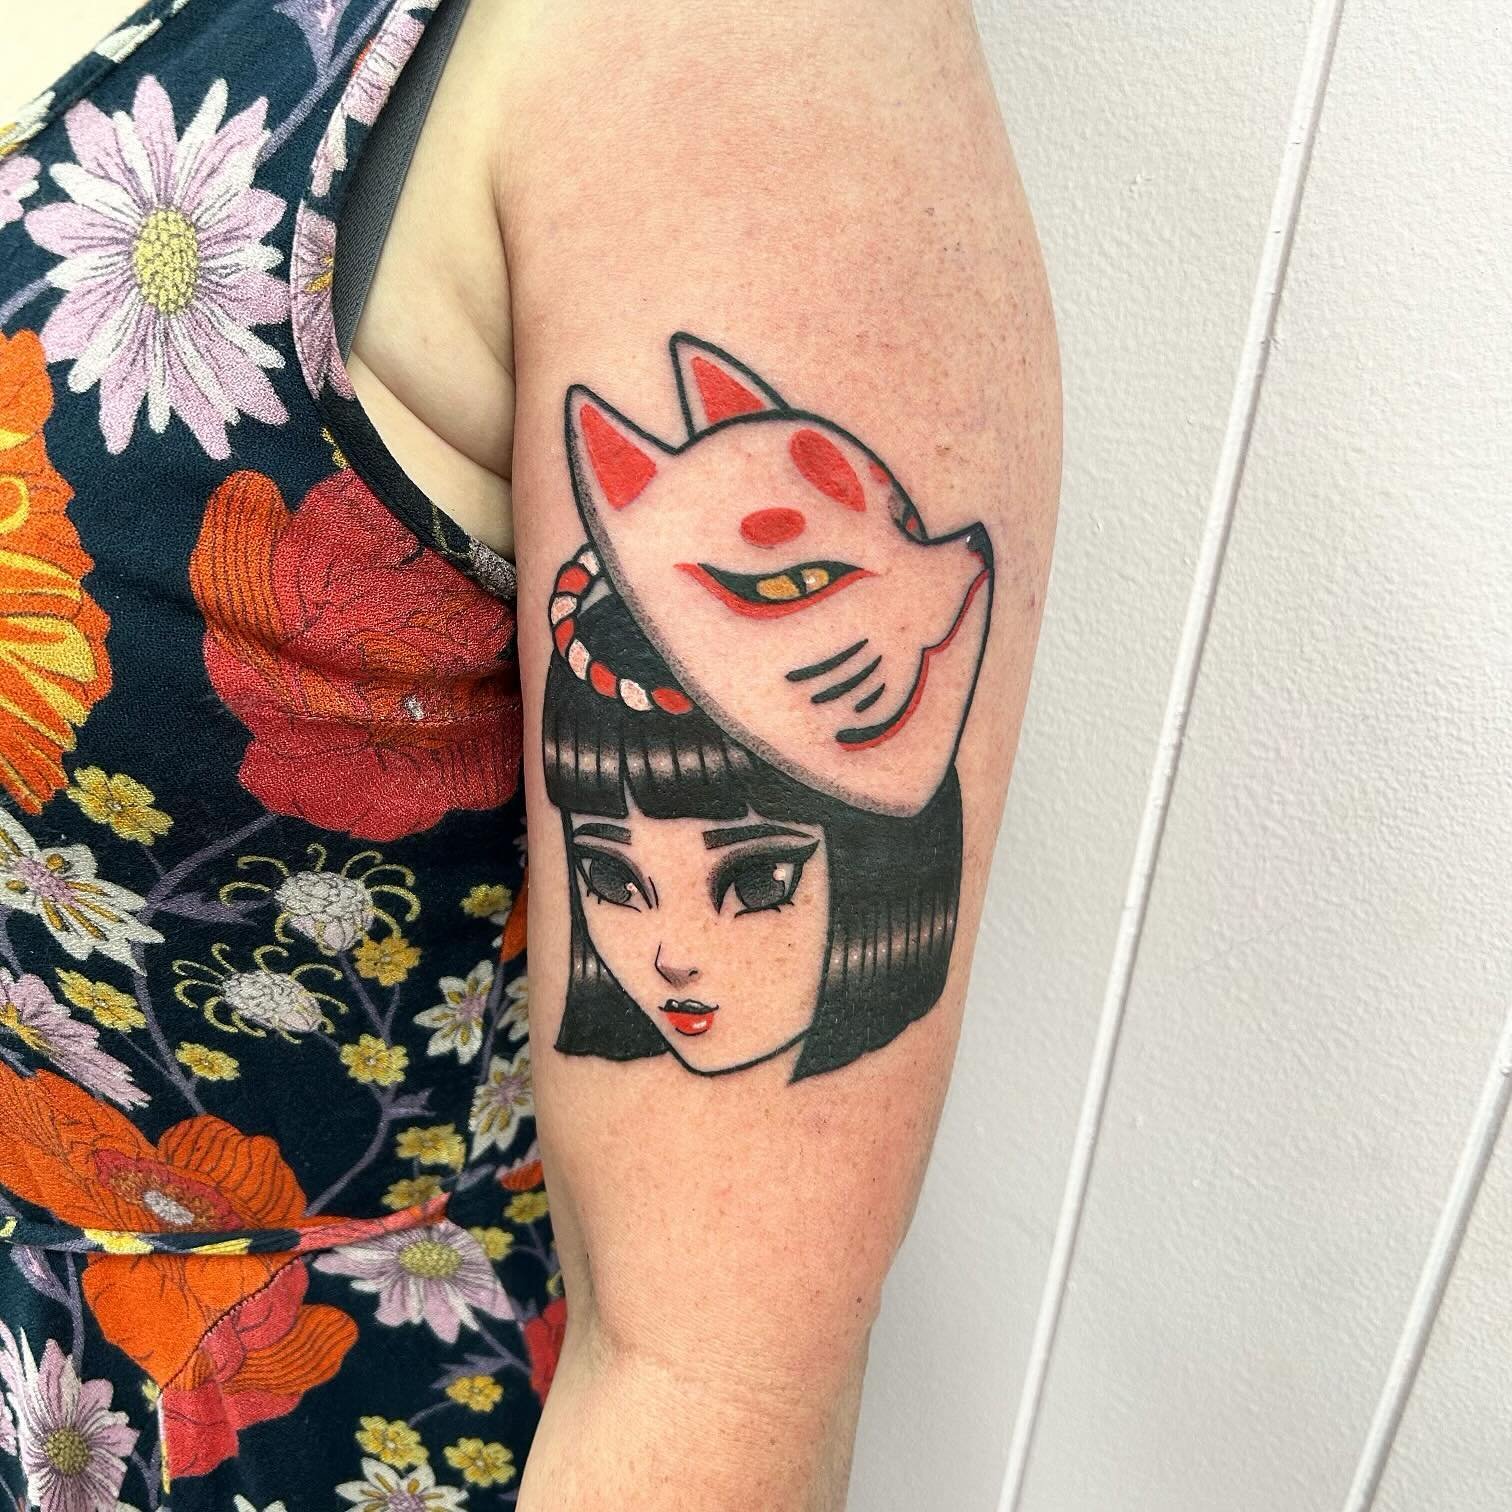 Lady face with kitsune mask by @samanthagenevera 
Samantha has some amazing deals for the month of April! Check out her page to see what she&rsquo;s got available. 
DM or call 07 5648 0626 to book! 
&bull;
&bull;
&bull;
&bull;
&bull;
#new #fyp #tradt